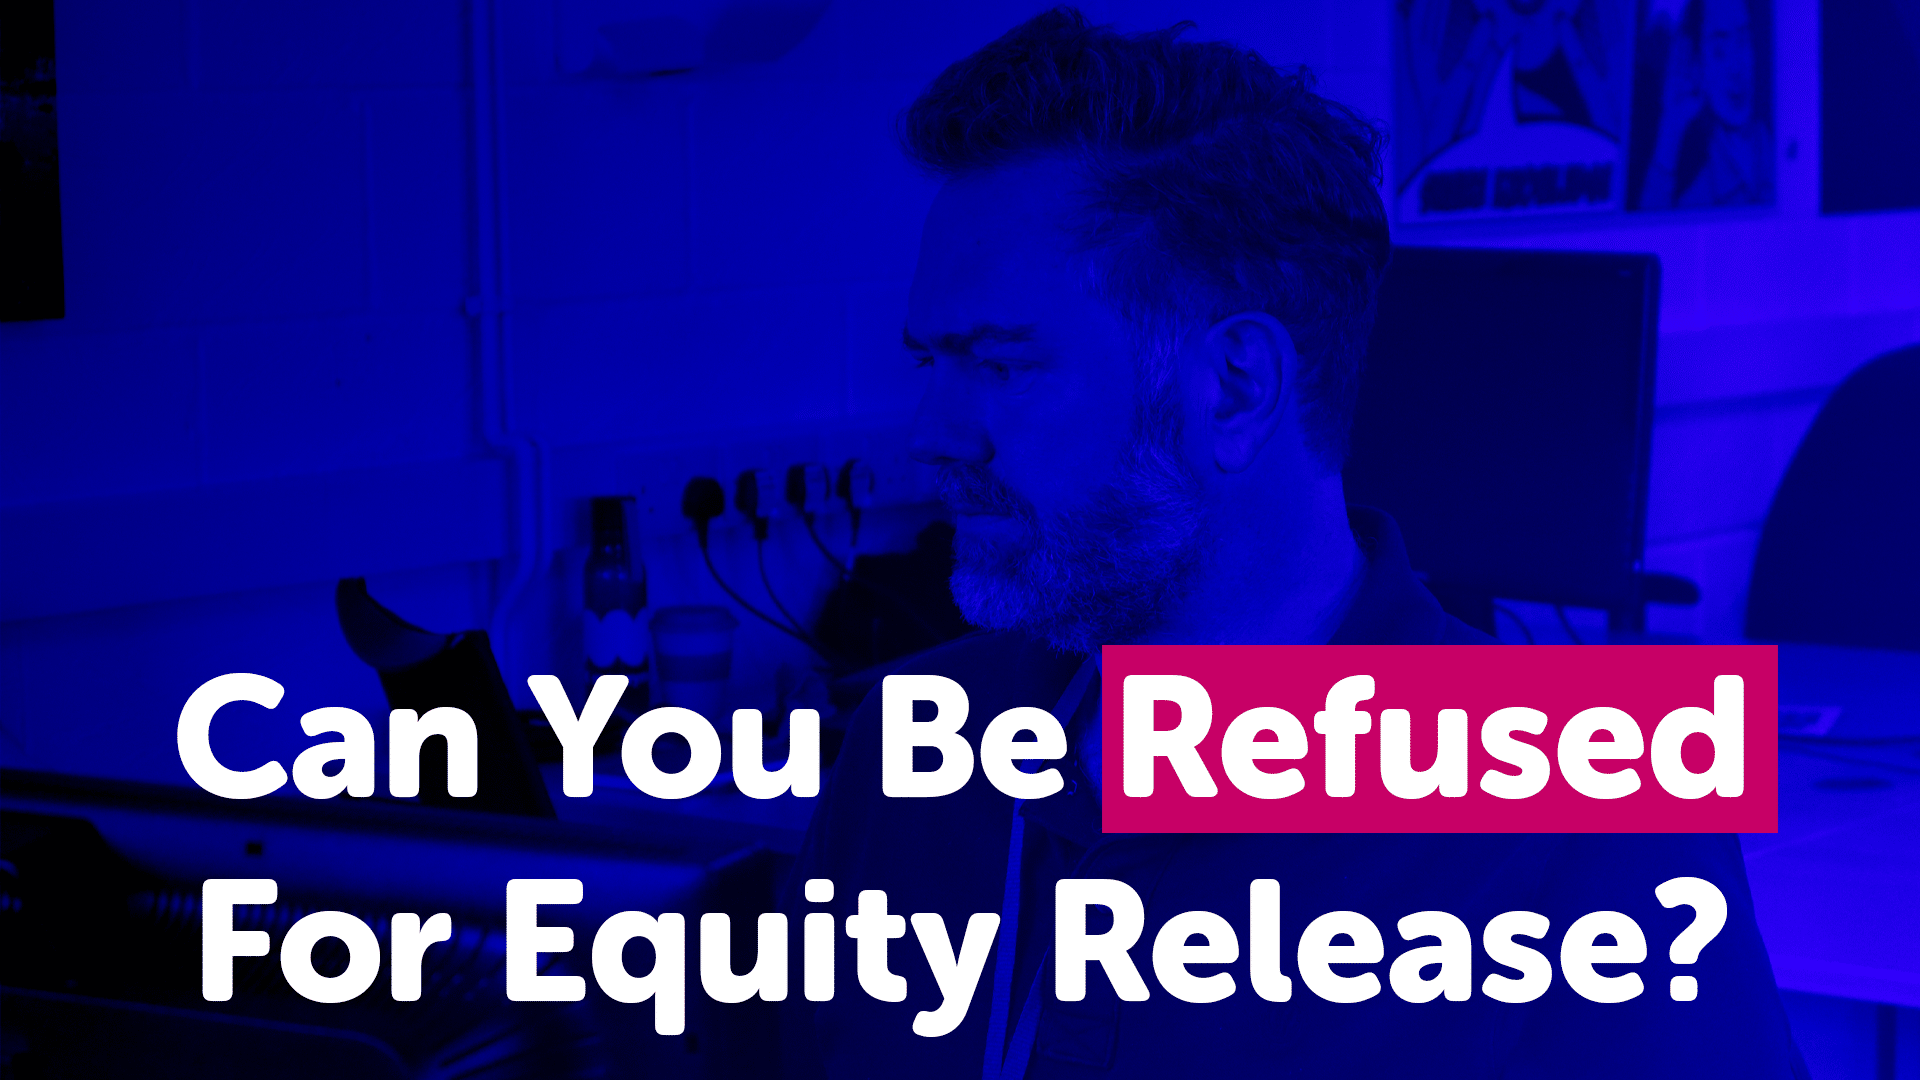 Can you be Refused Equity Release?